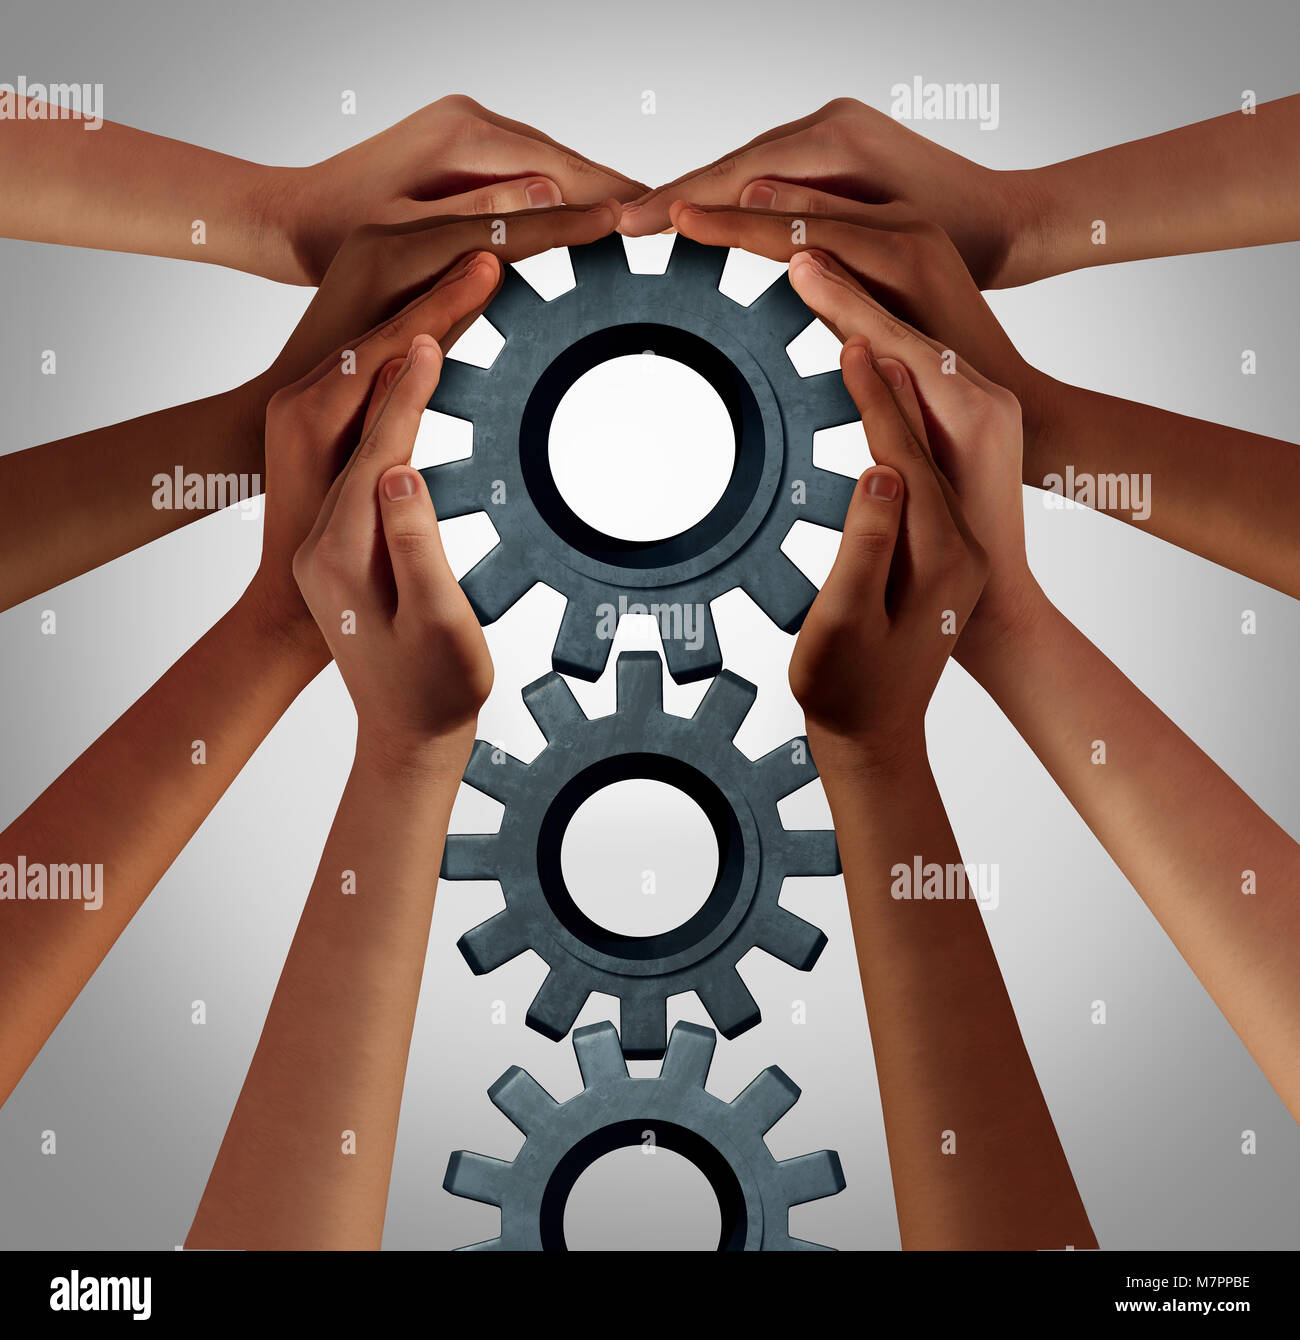 Industry union and business collaboration concept as a team of diverse people turning a group of gears as company workers idea. Stock Photo